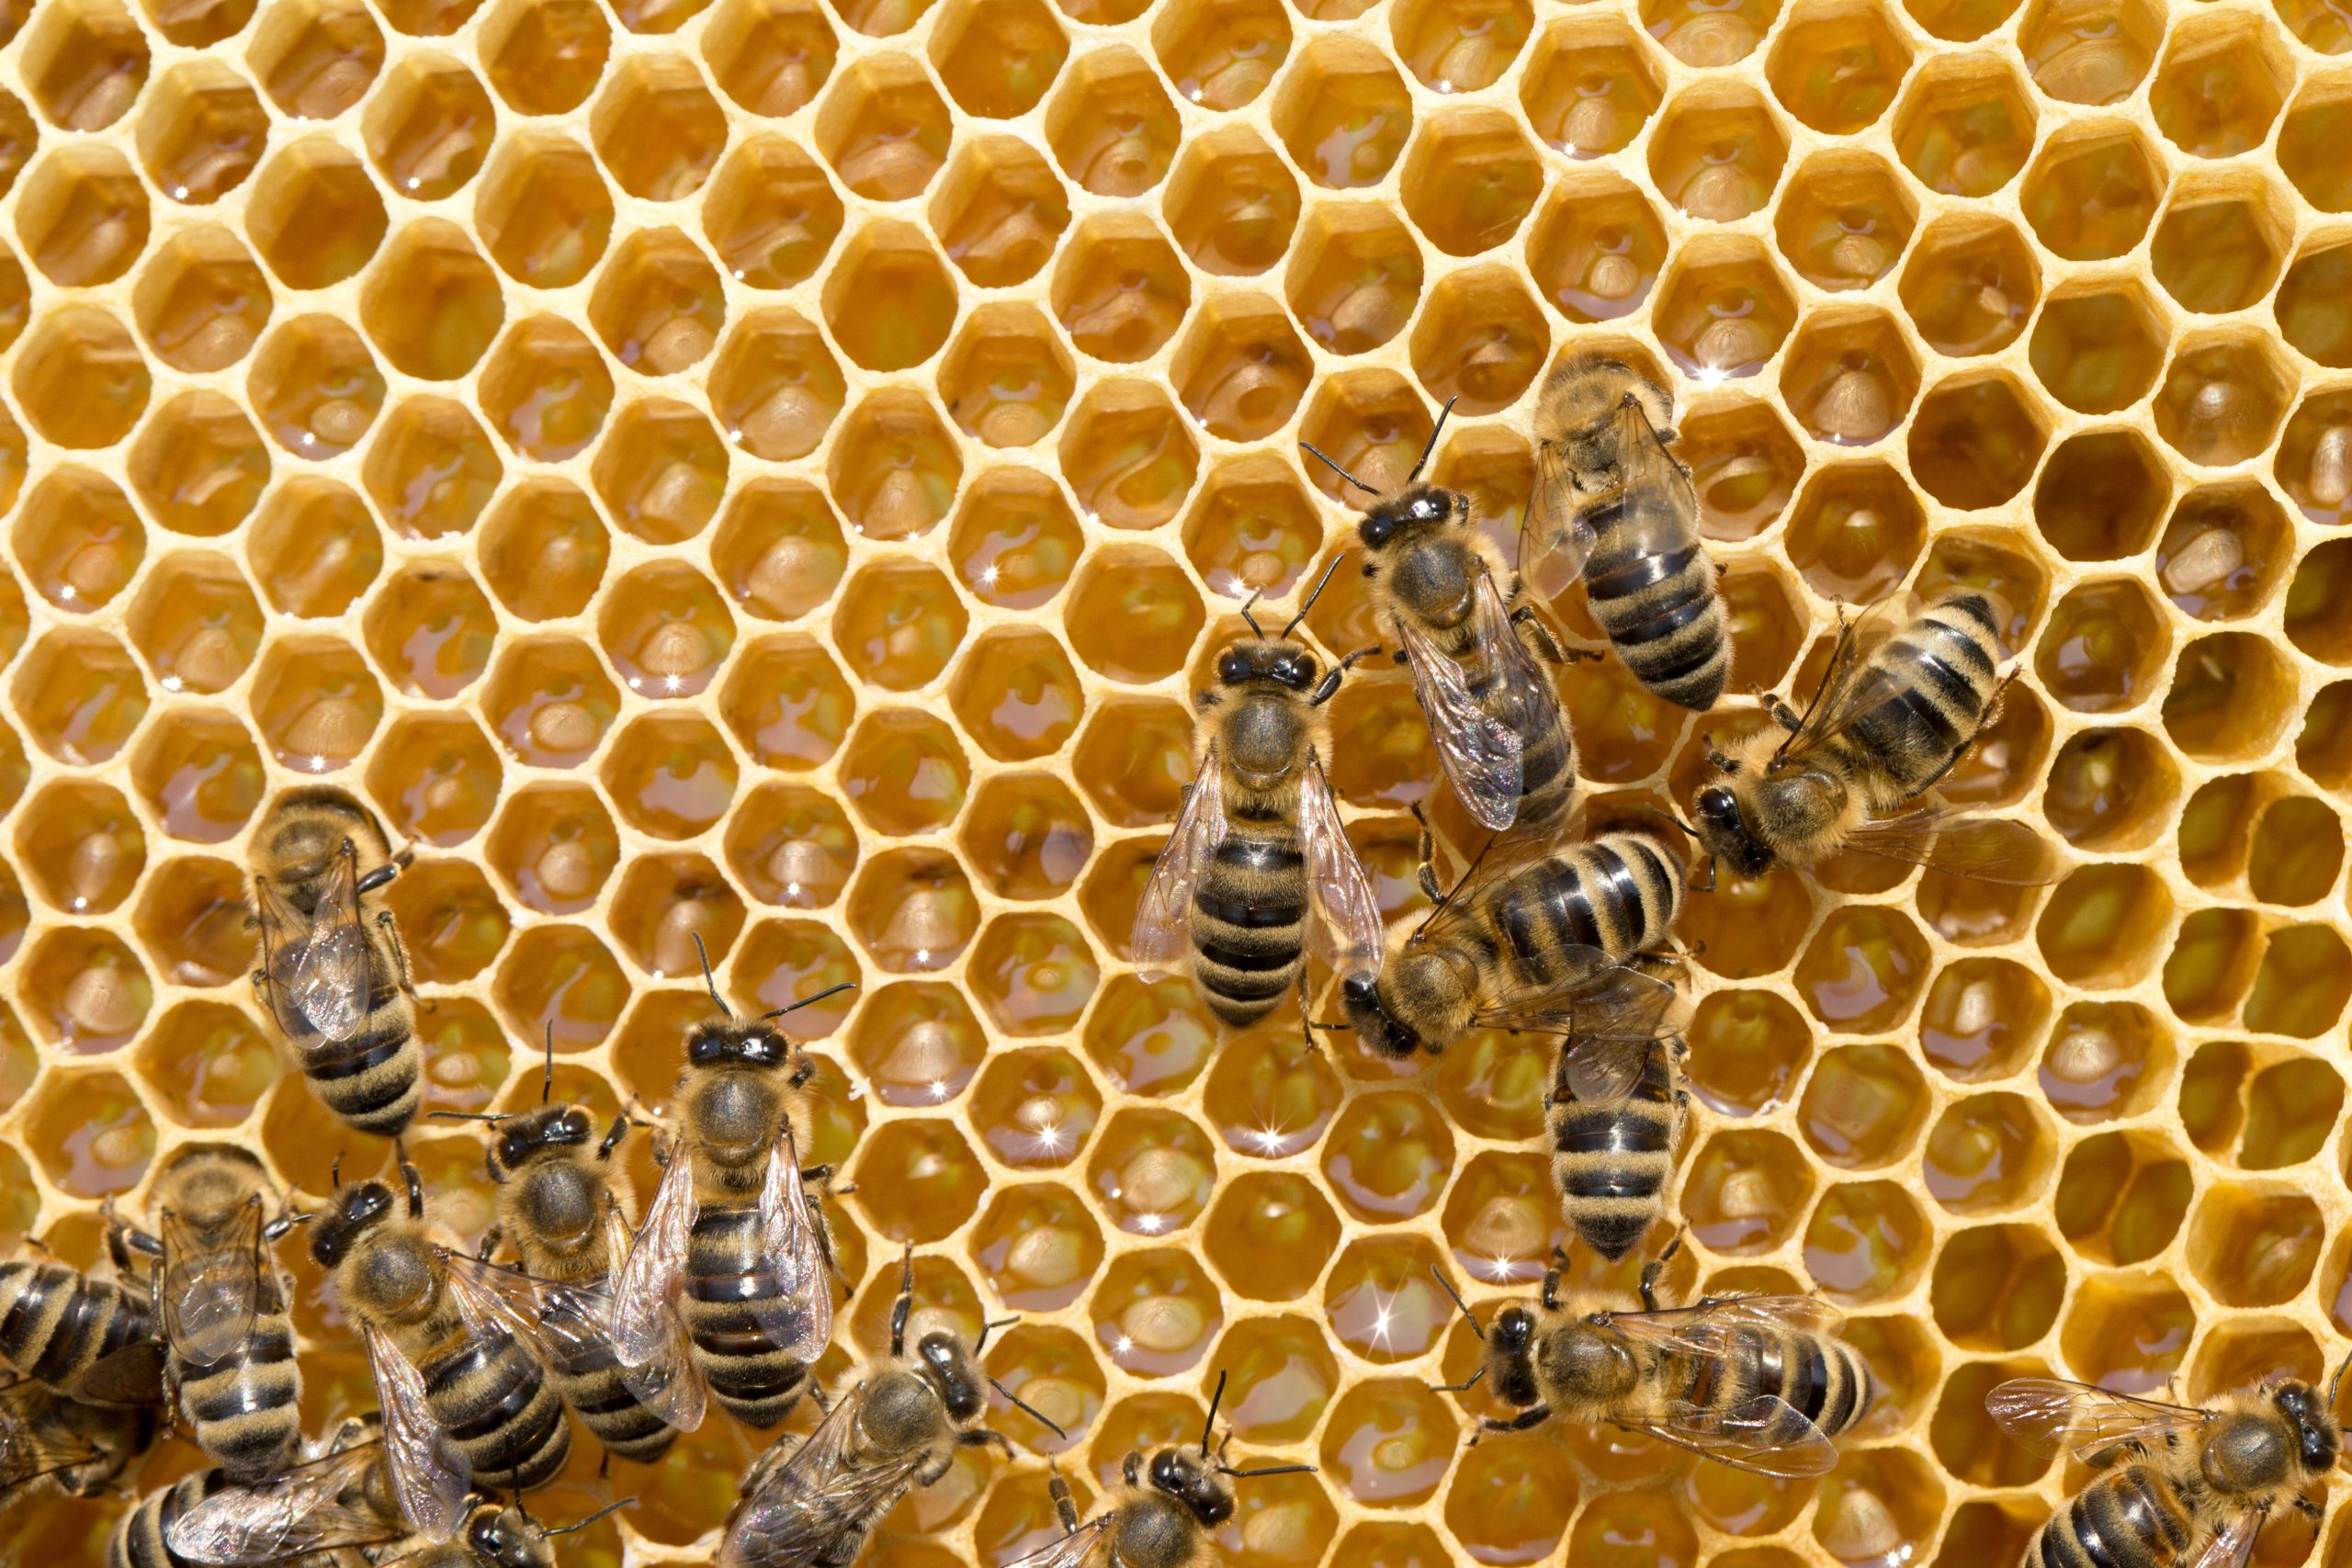 How is Honey Made?